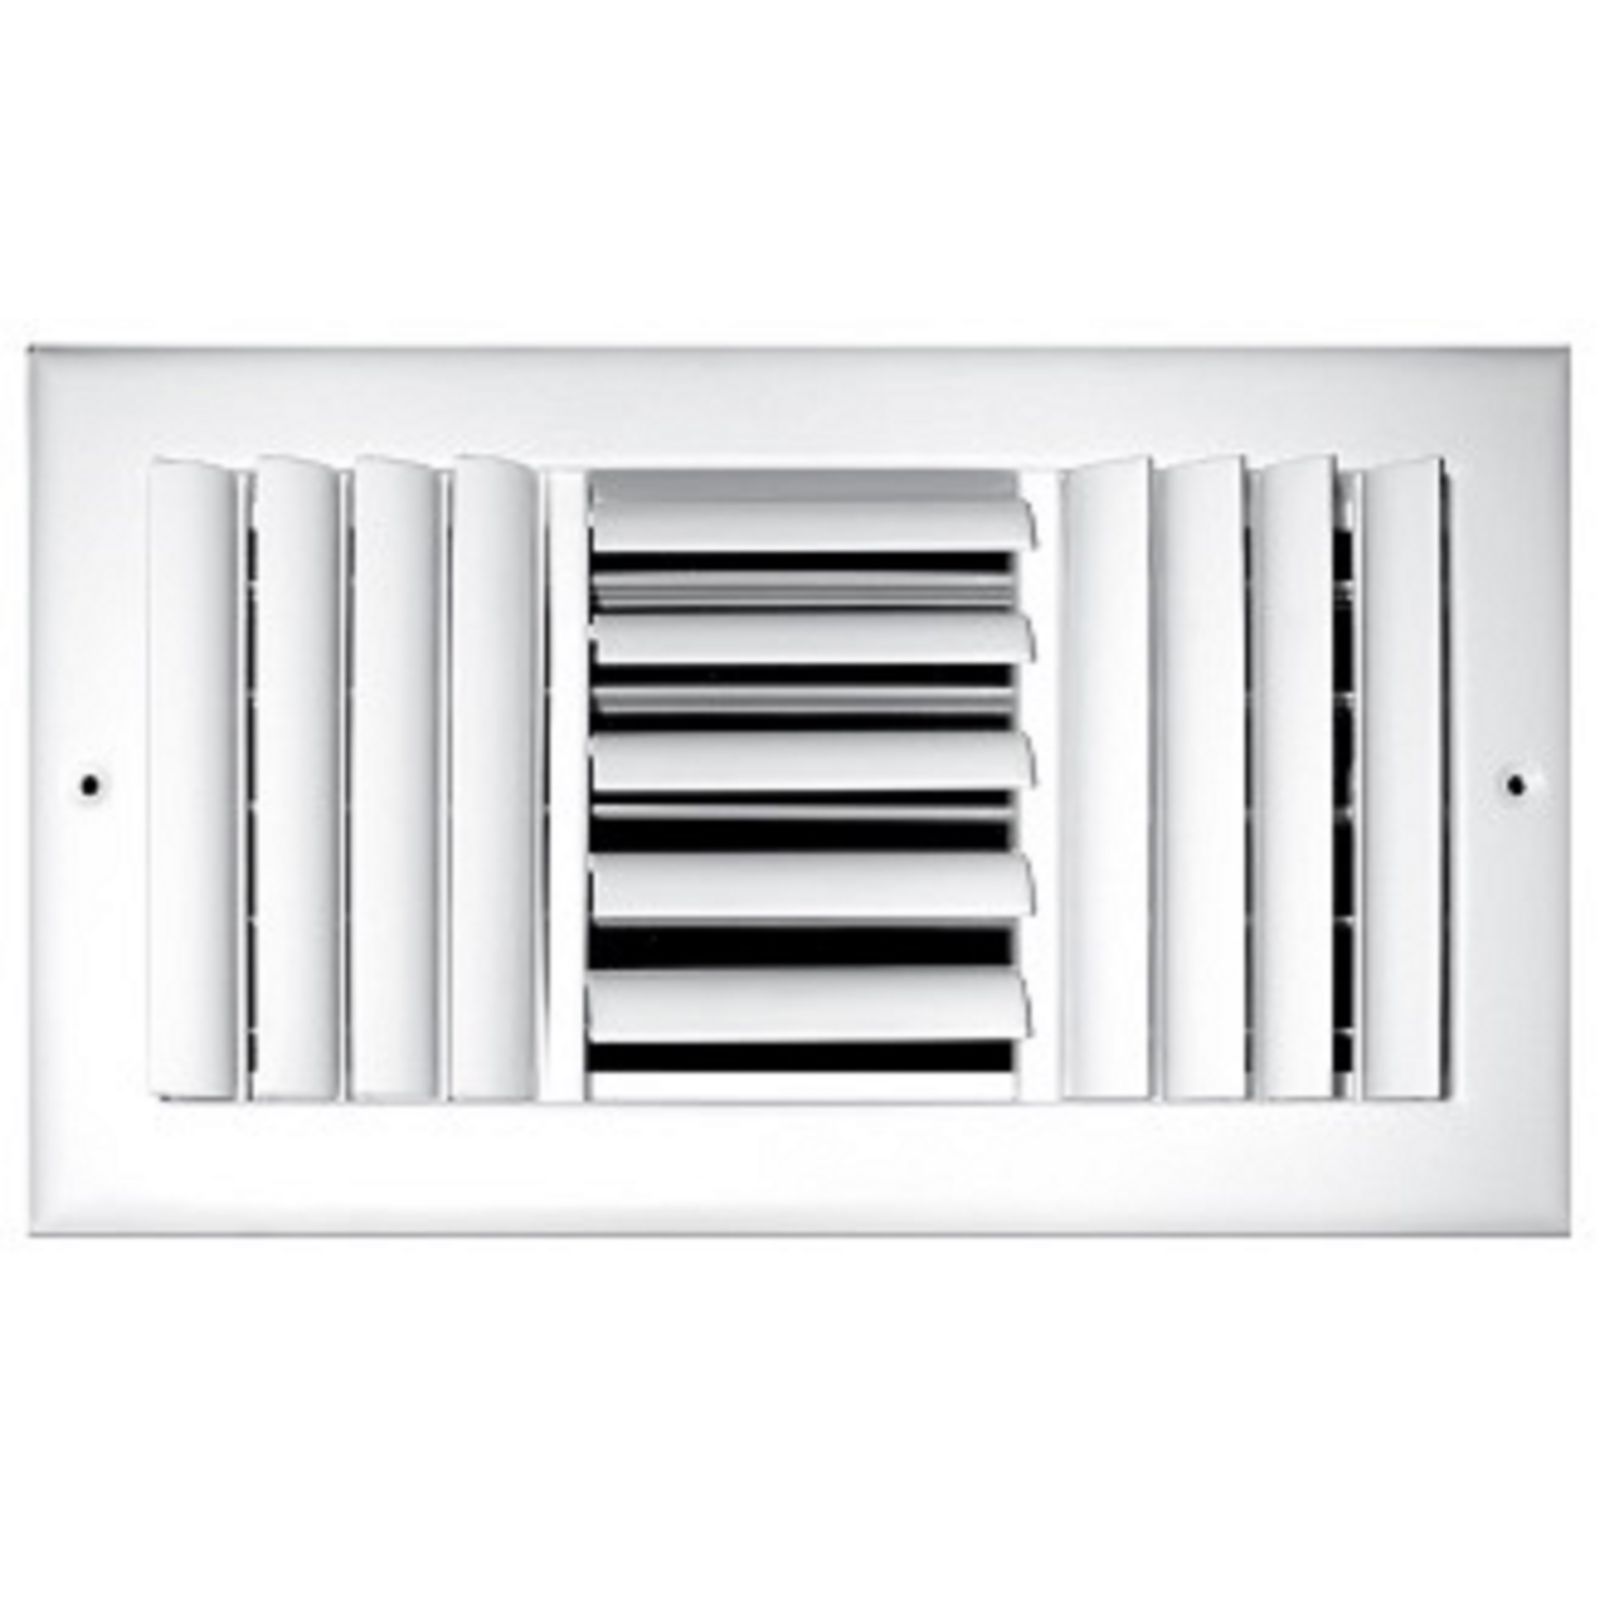 TRUaire 303M 10X06 - Steel Adjustable Curved Blade Wall/Ceiling Register With Multi Shutter Damper, 3-Way, White, 10" X 06"